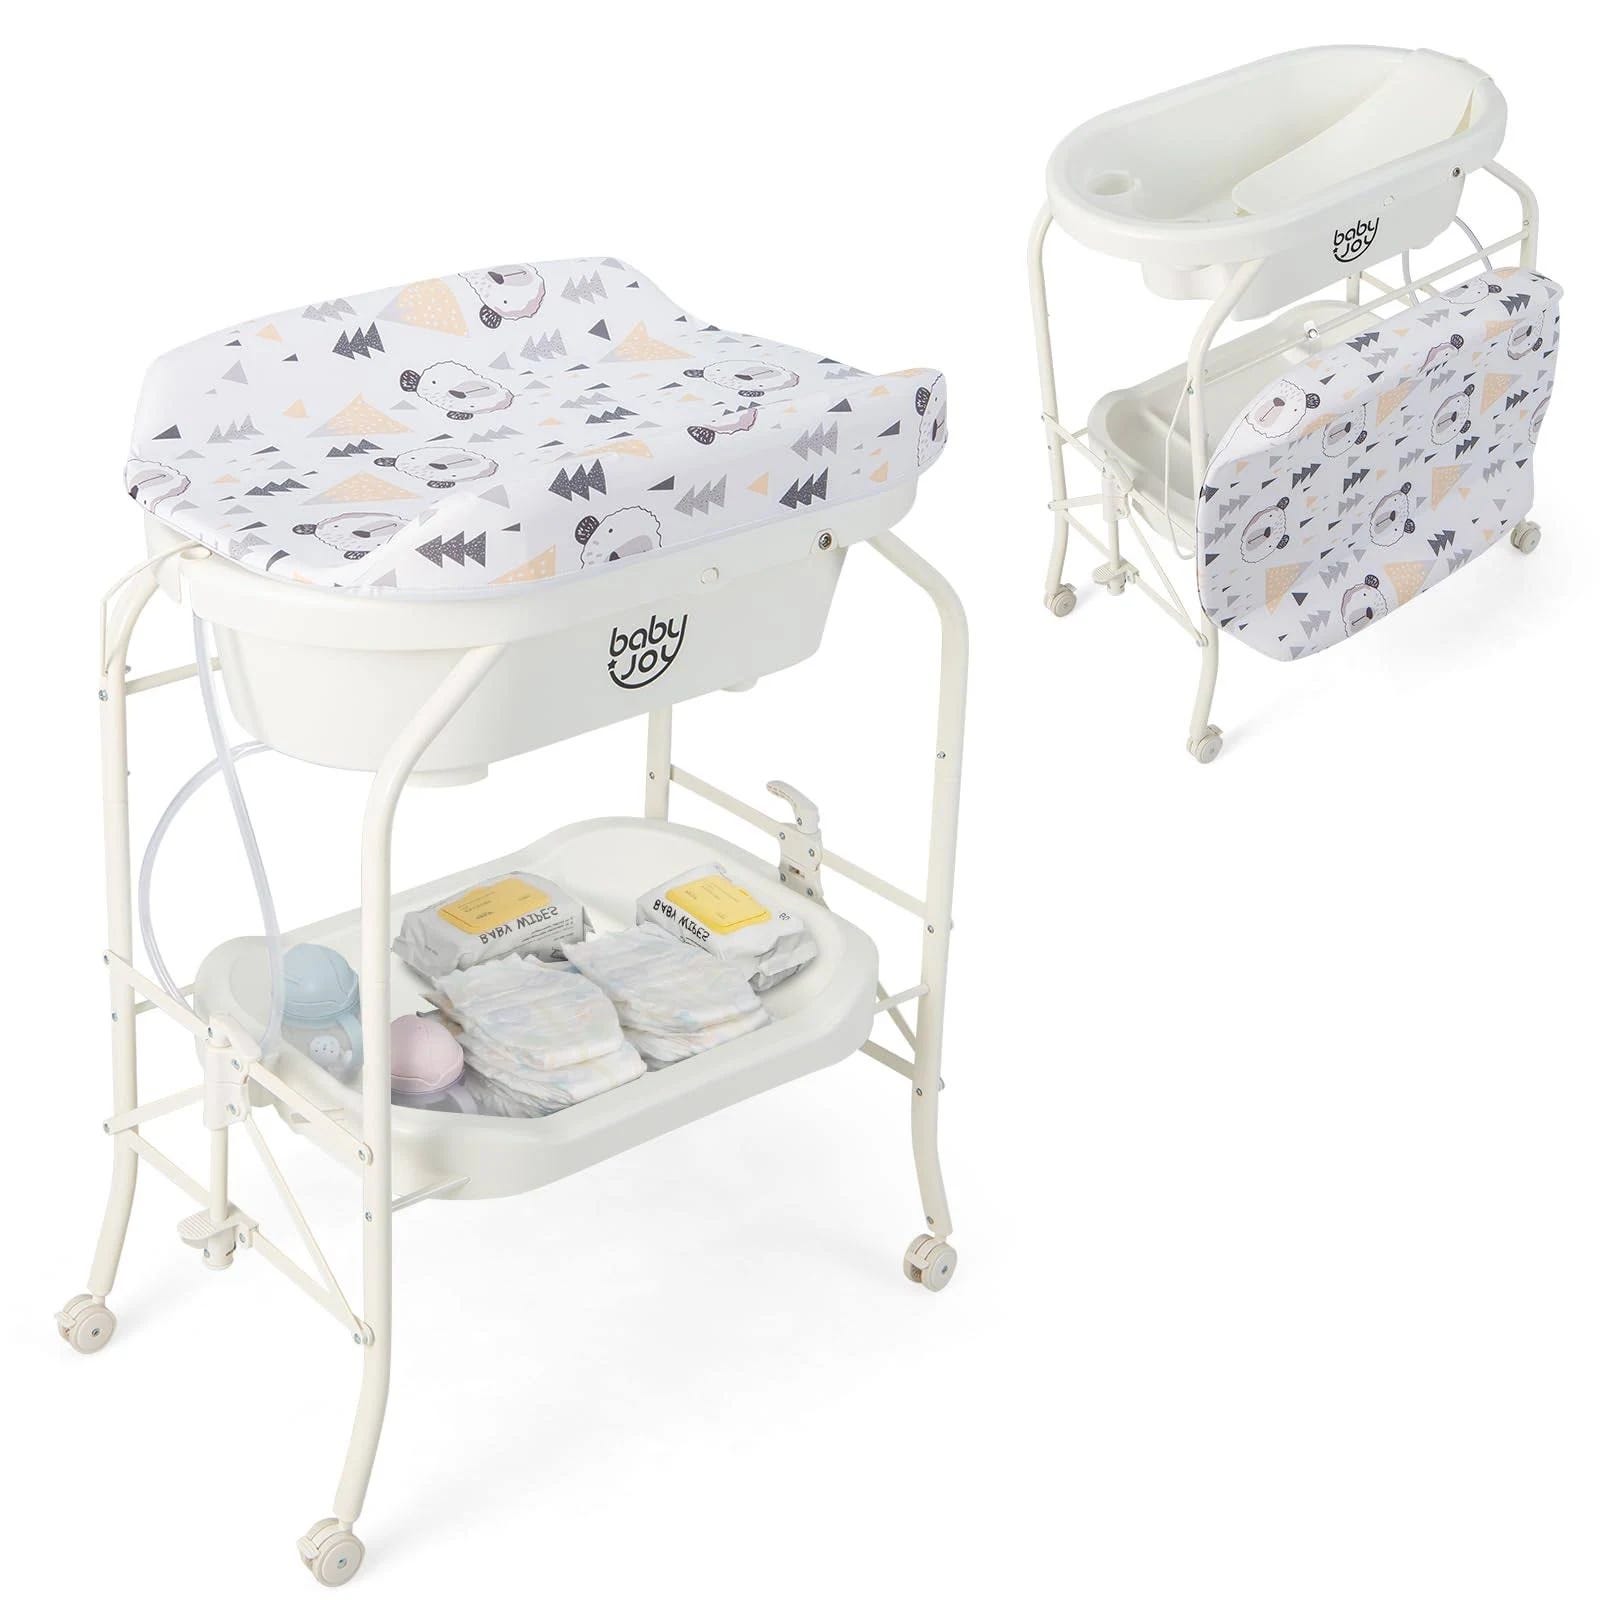 Portable Changing Table with Infant Bathtub | Image